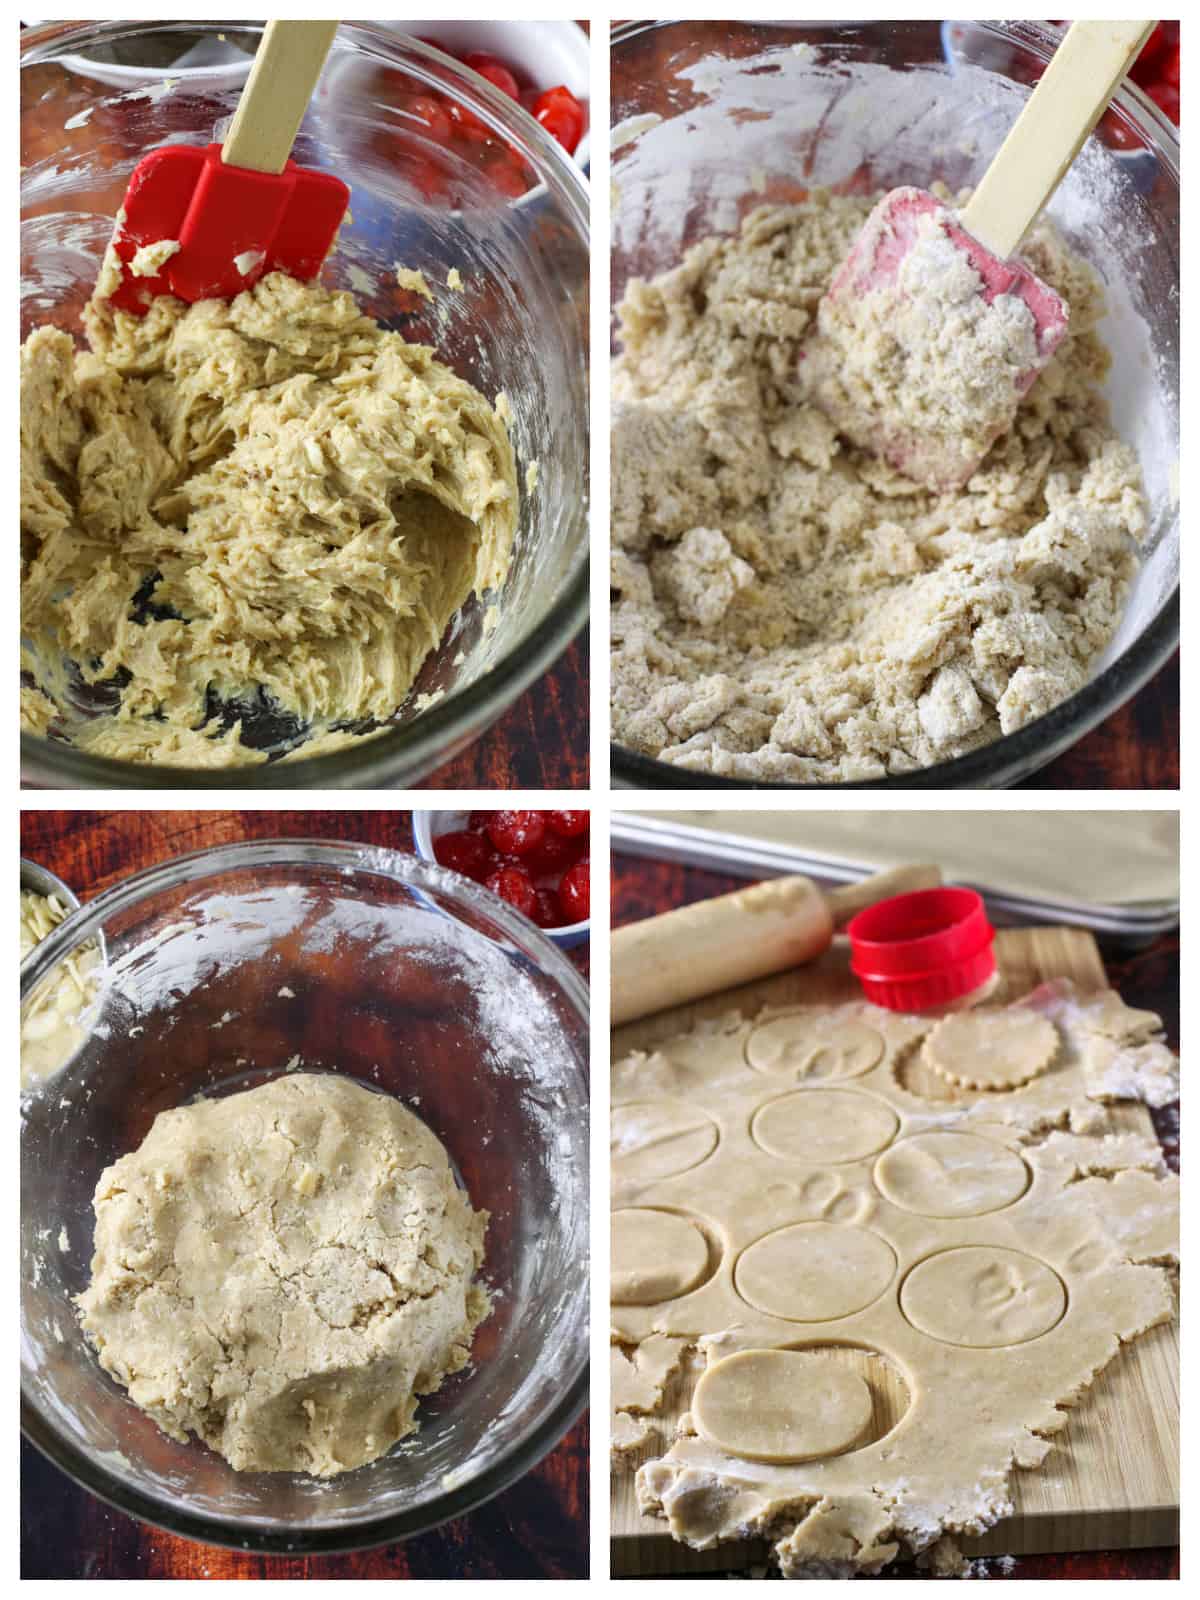 A collage showing how to make the dough for Florentine biscuits, First is the creaming of butter and sugar. Next is the adding of flour mixture. Then shaping the dough into a ball. then the rolled out dough for cutting out circles.